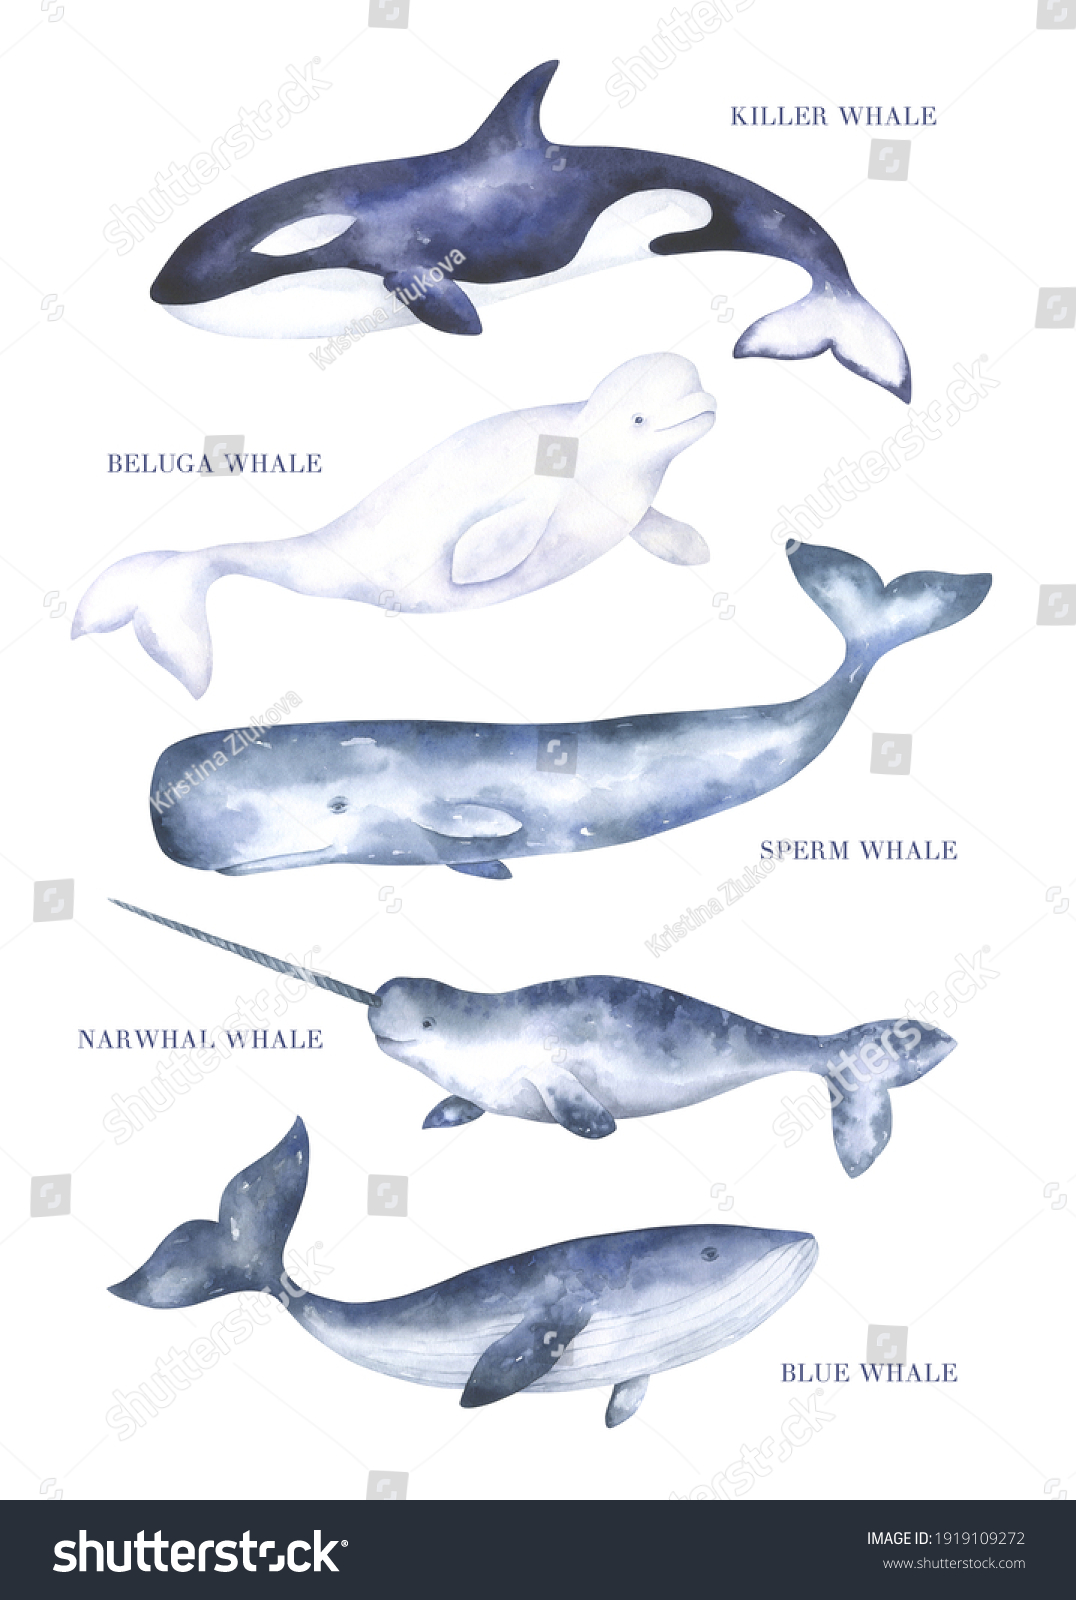 77,202 Watercolor fishes Images, Stock Photos & Vectors | Shutterstock